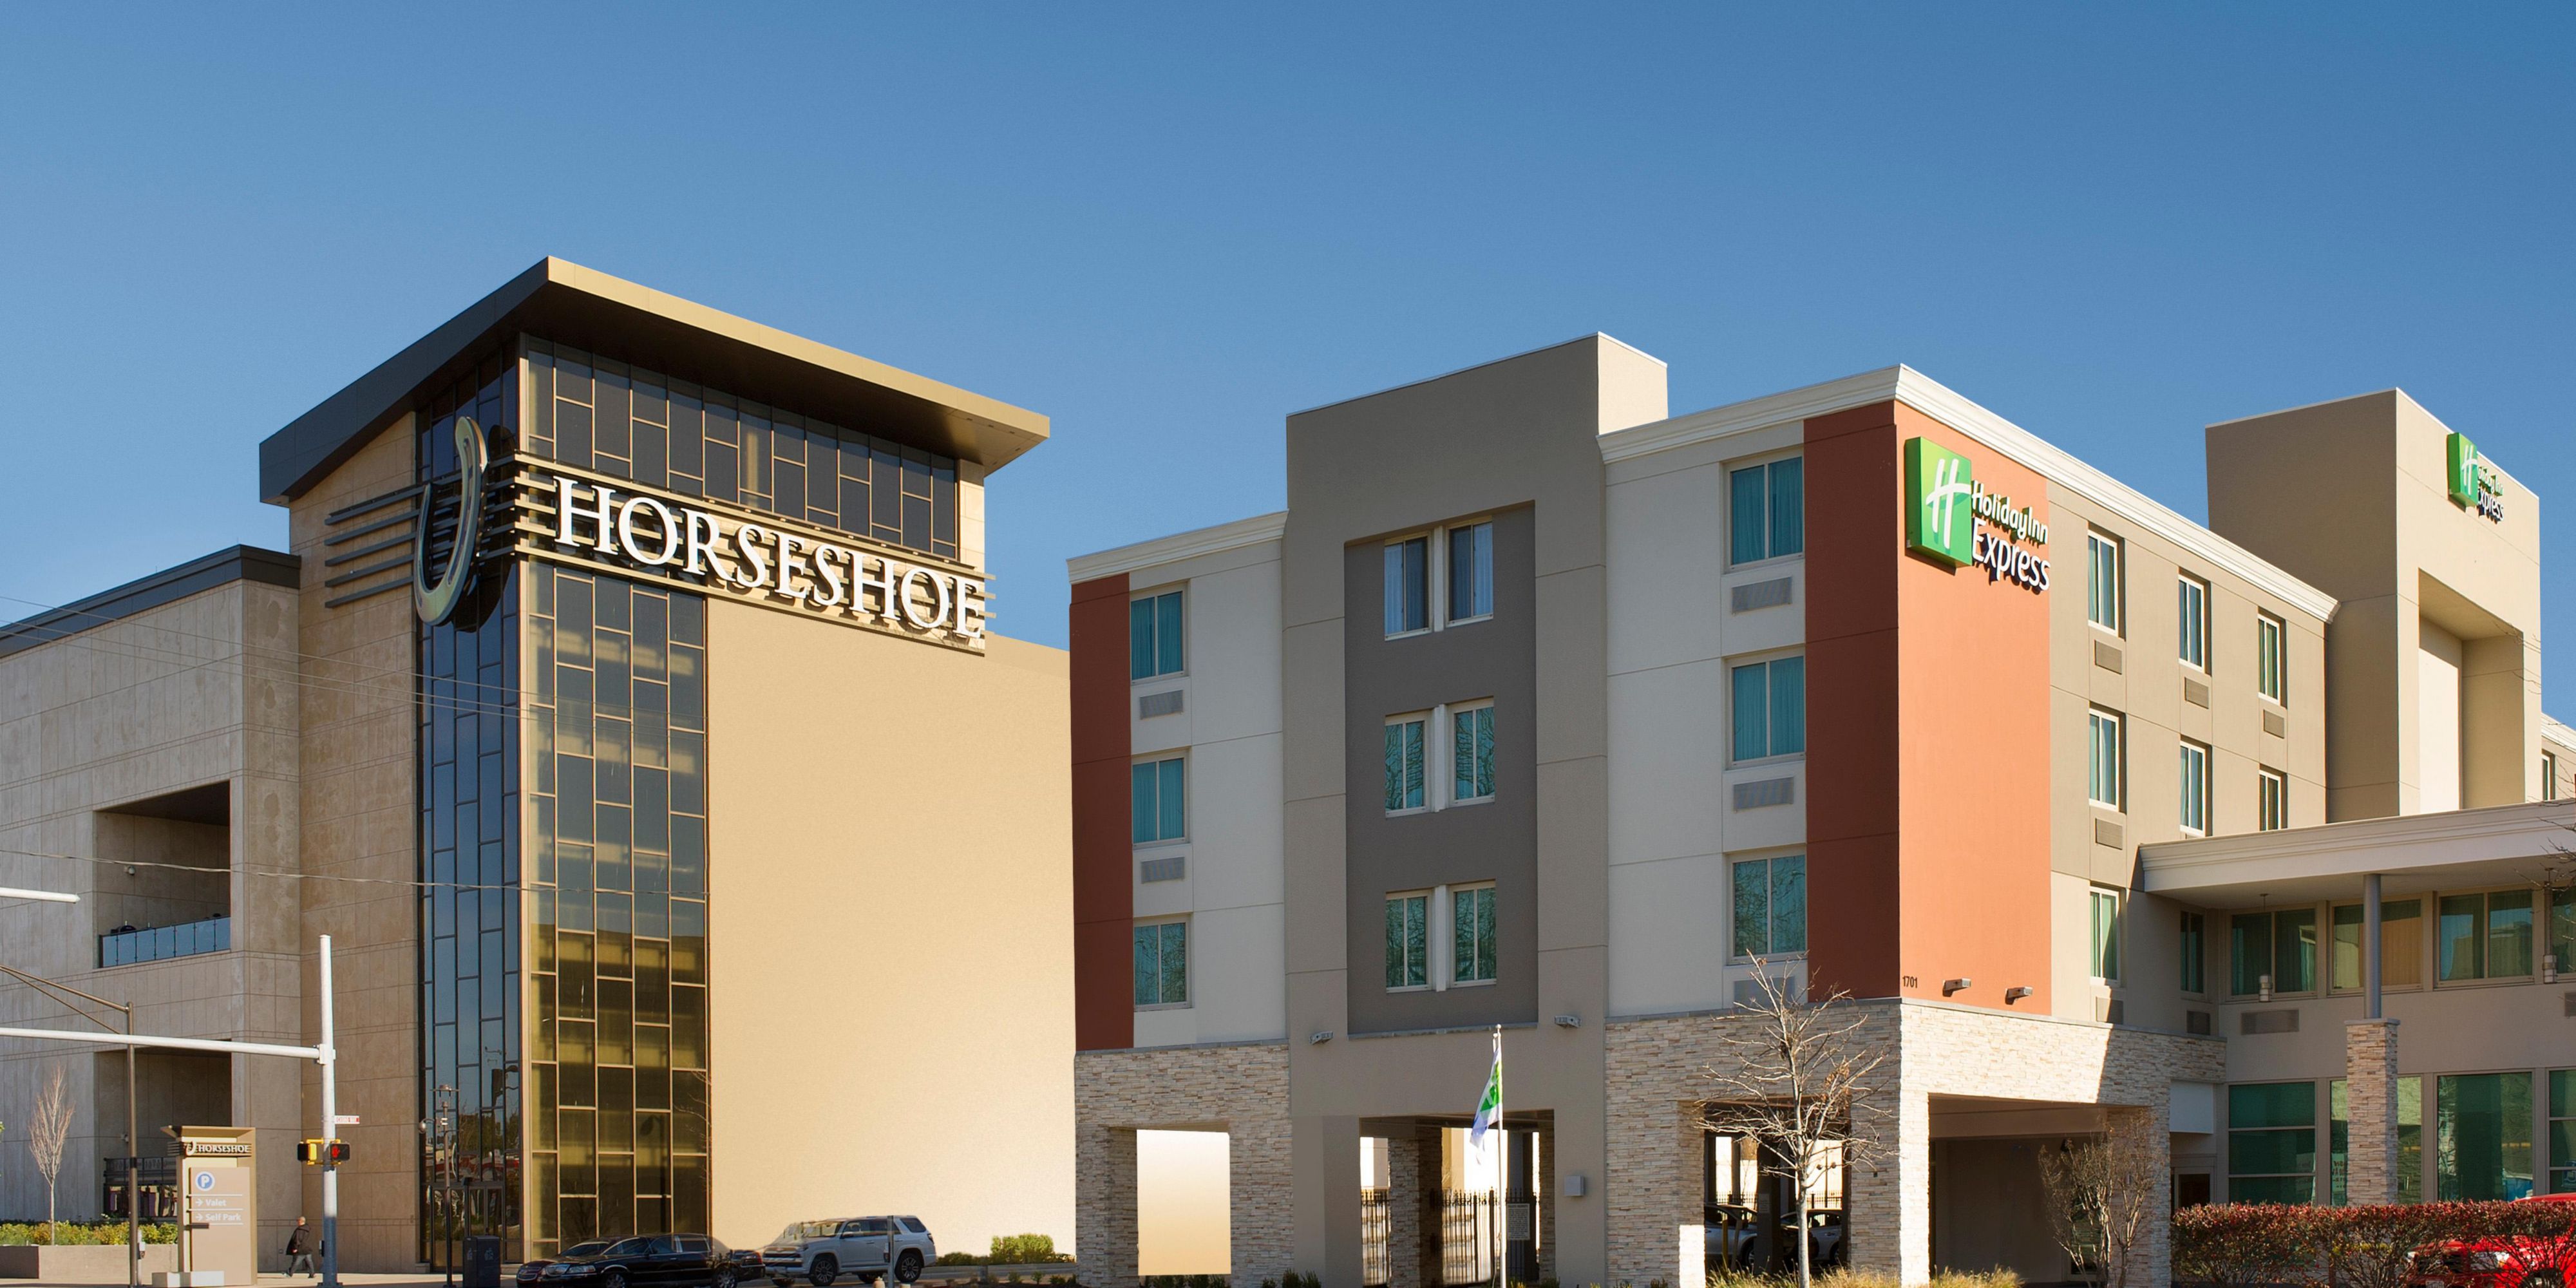 Located next door to Horseshoe Casino! Enjoy dinner, dancing, and gambling during your stay!